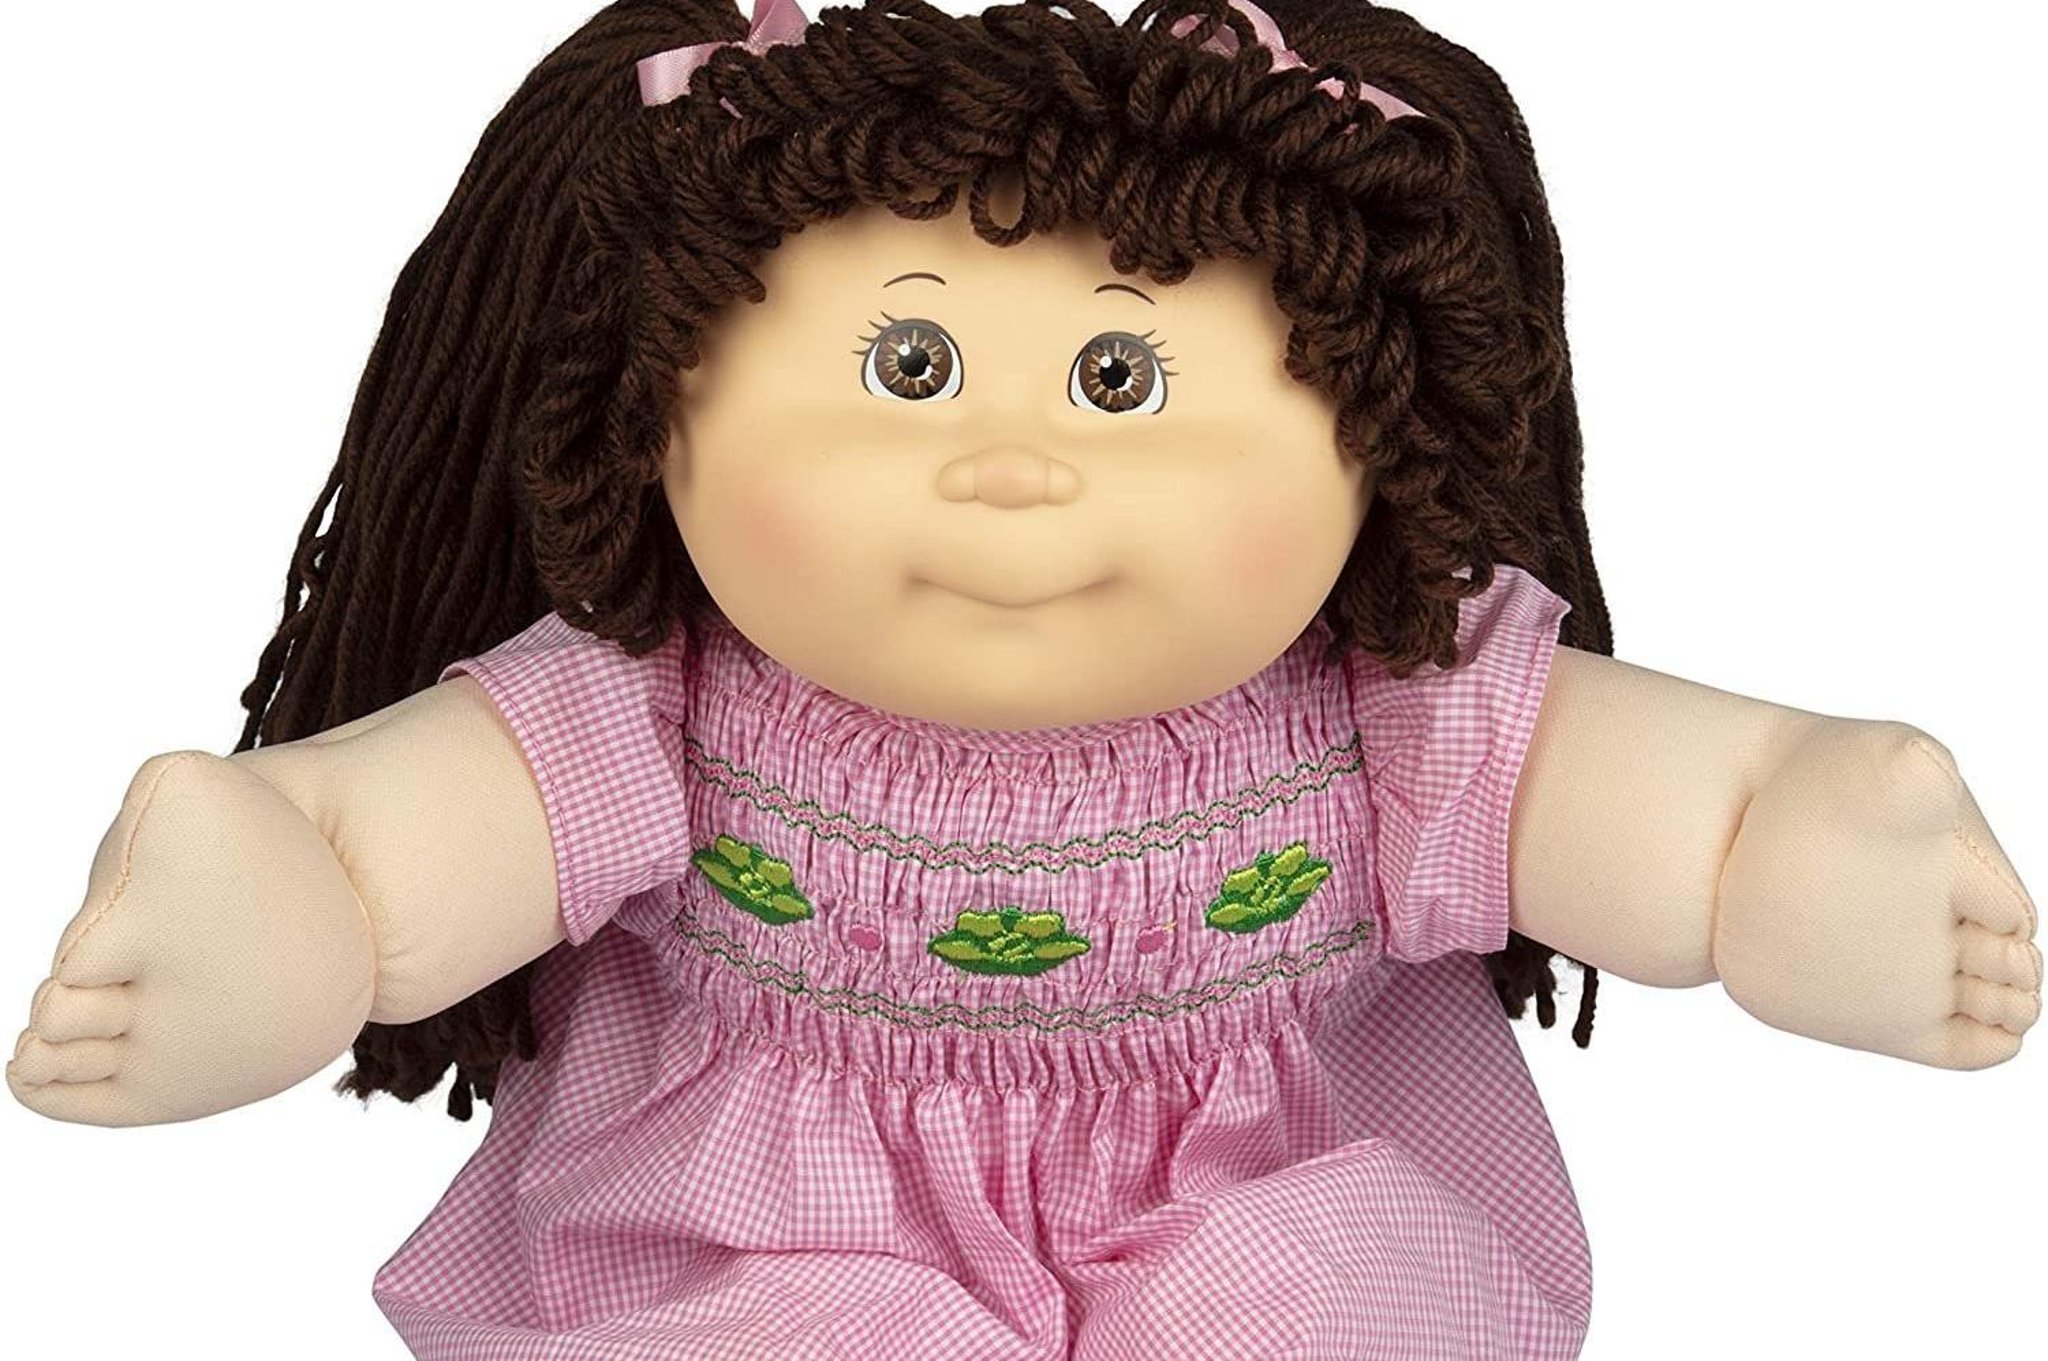 Cabbage patch doll macbook air 2018 apple usa